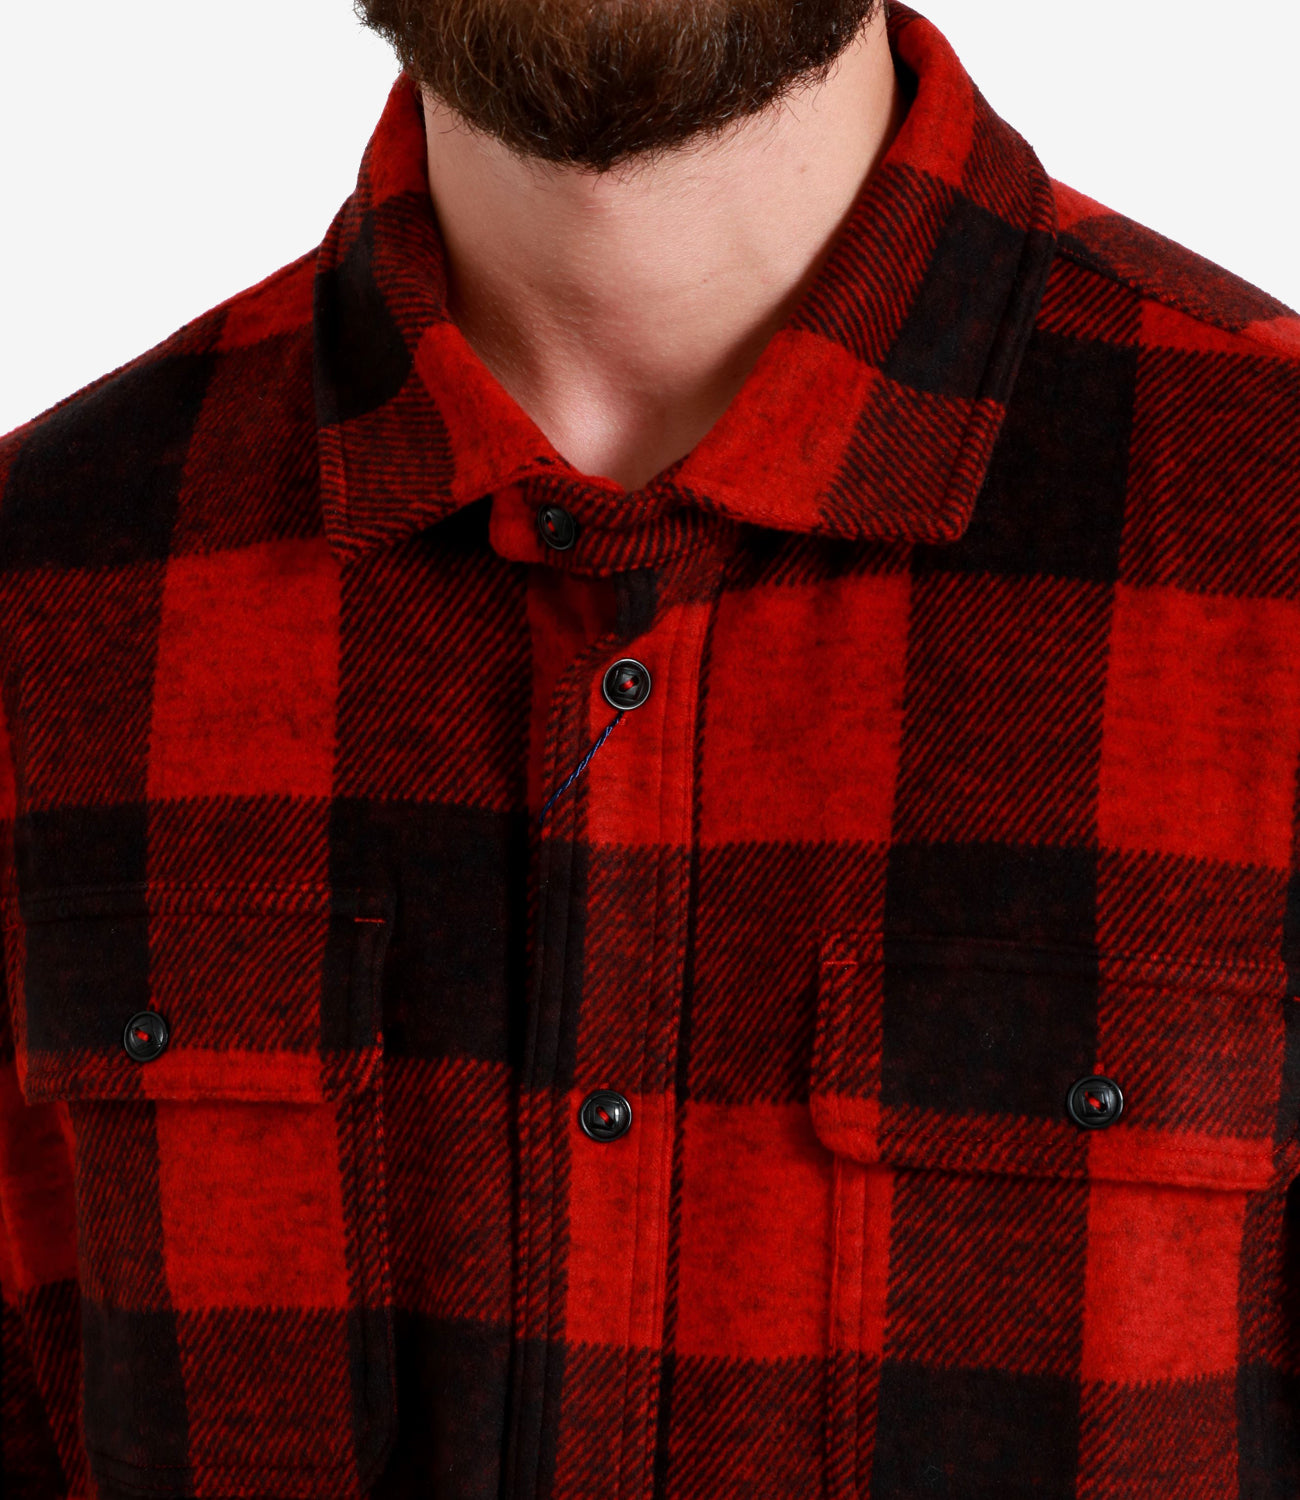 Polo Ralph Lauren | Red and Black Shirt